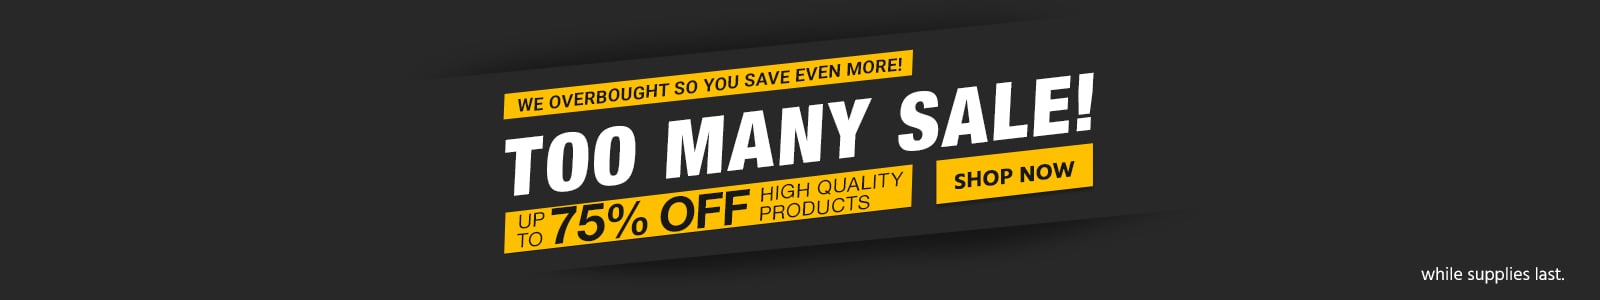 The Too Many Sale!
We overbought so you save even more! 
Up to 75% off high quality products
While Supplies Last
Shop Now